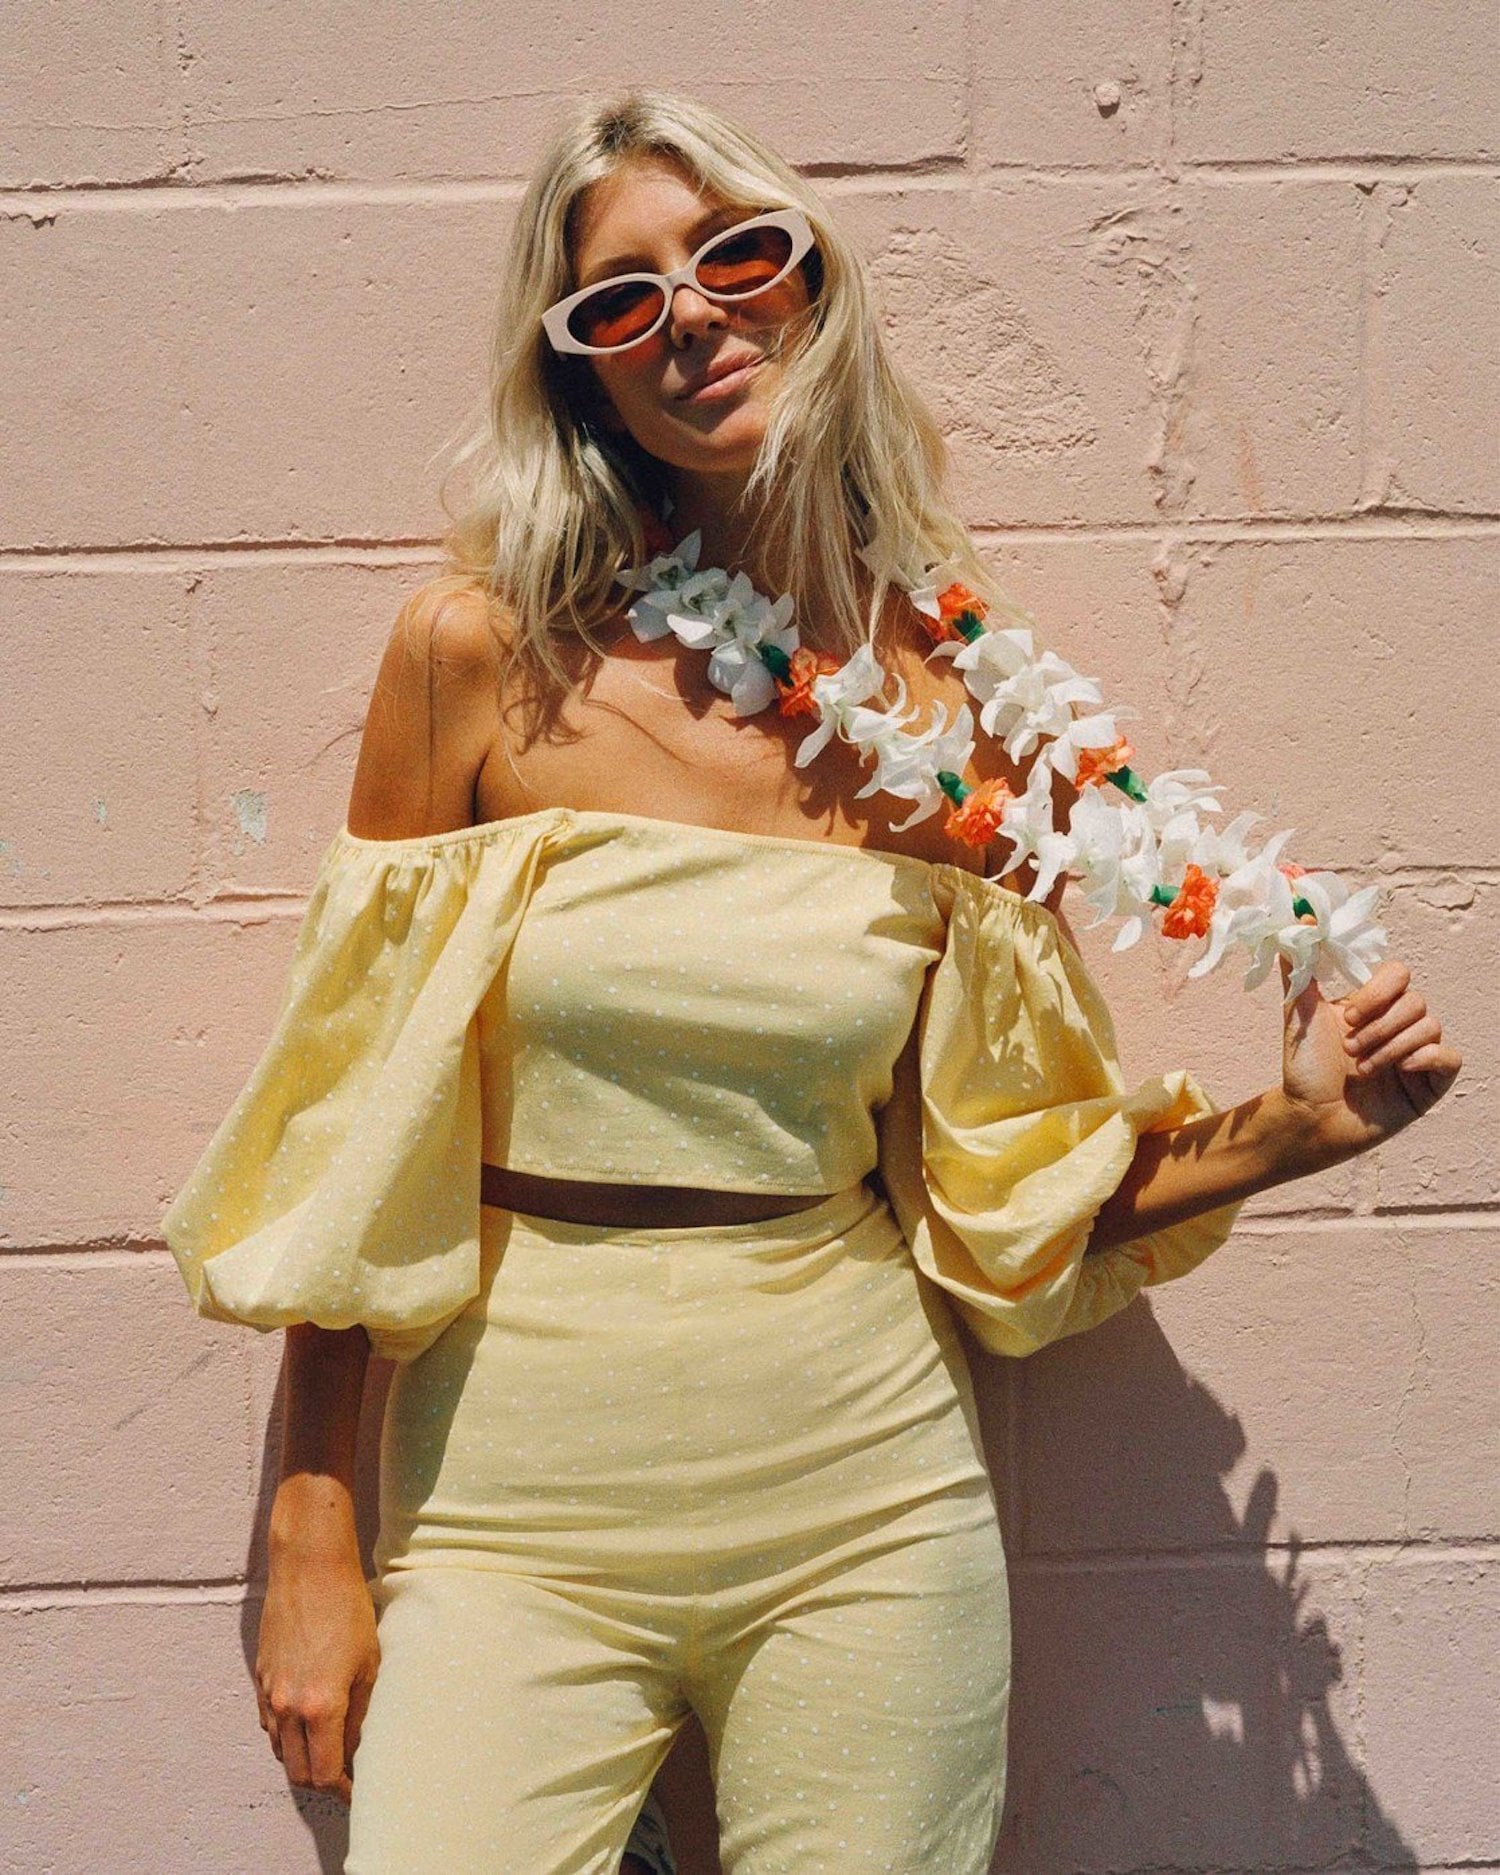 Billabong x The Salty Blonde Sun Glow Crop Top | 86 Discounted Fashion  Finds to Shop at the Nordstrom Half Yearly Sale This Week | POPSUGAR Fashion  Photo 58